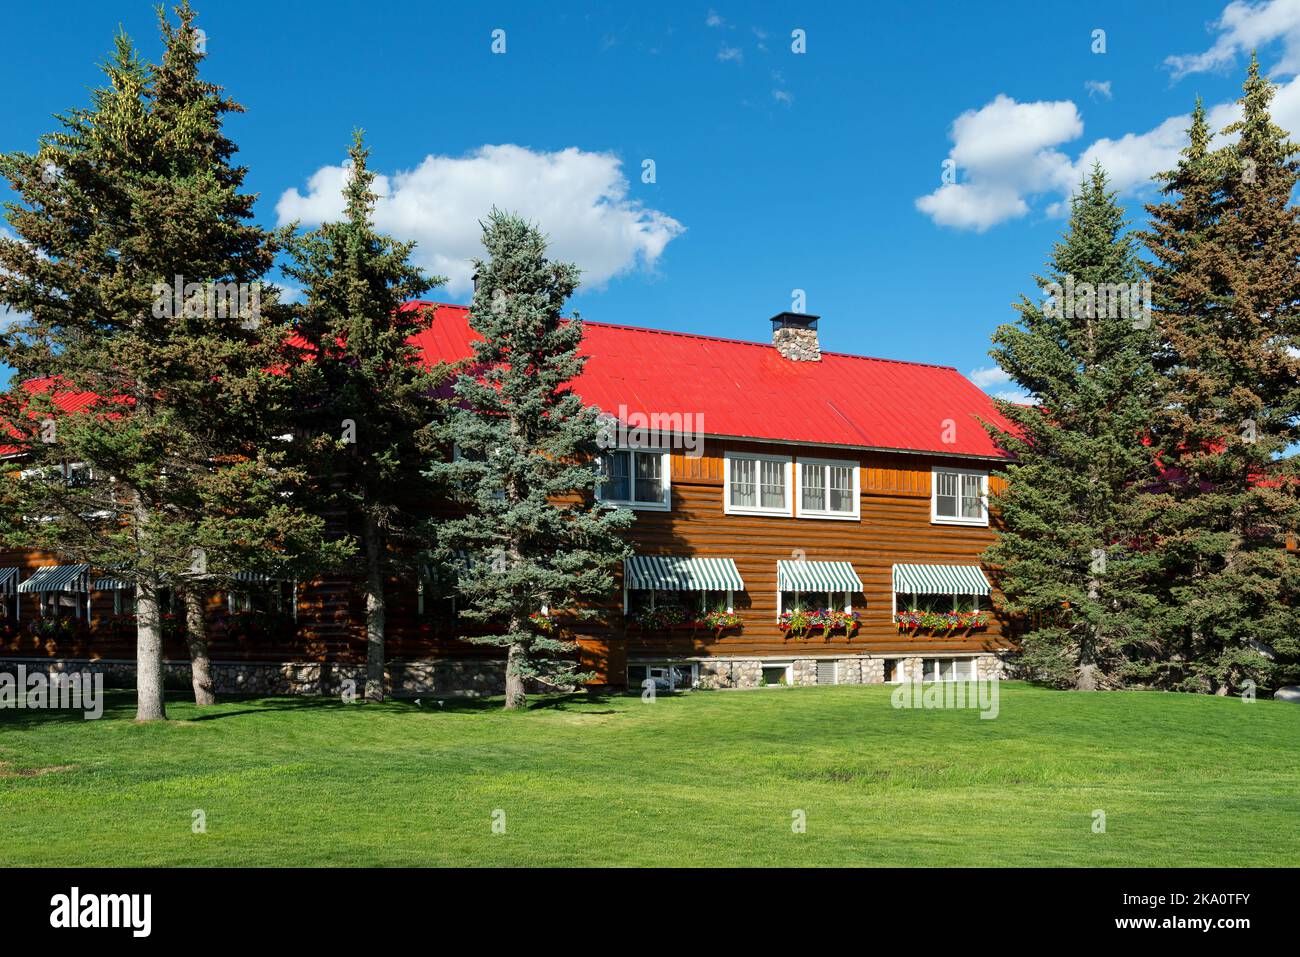 Facade of the Post Hotel in the midst of pine trees, Lake Louise, Alberta, Canada. Stock Photo